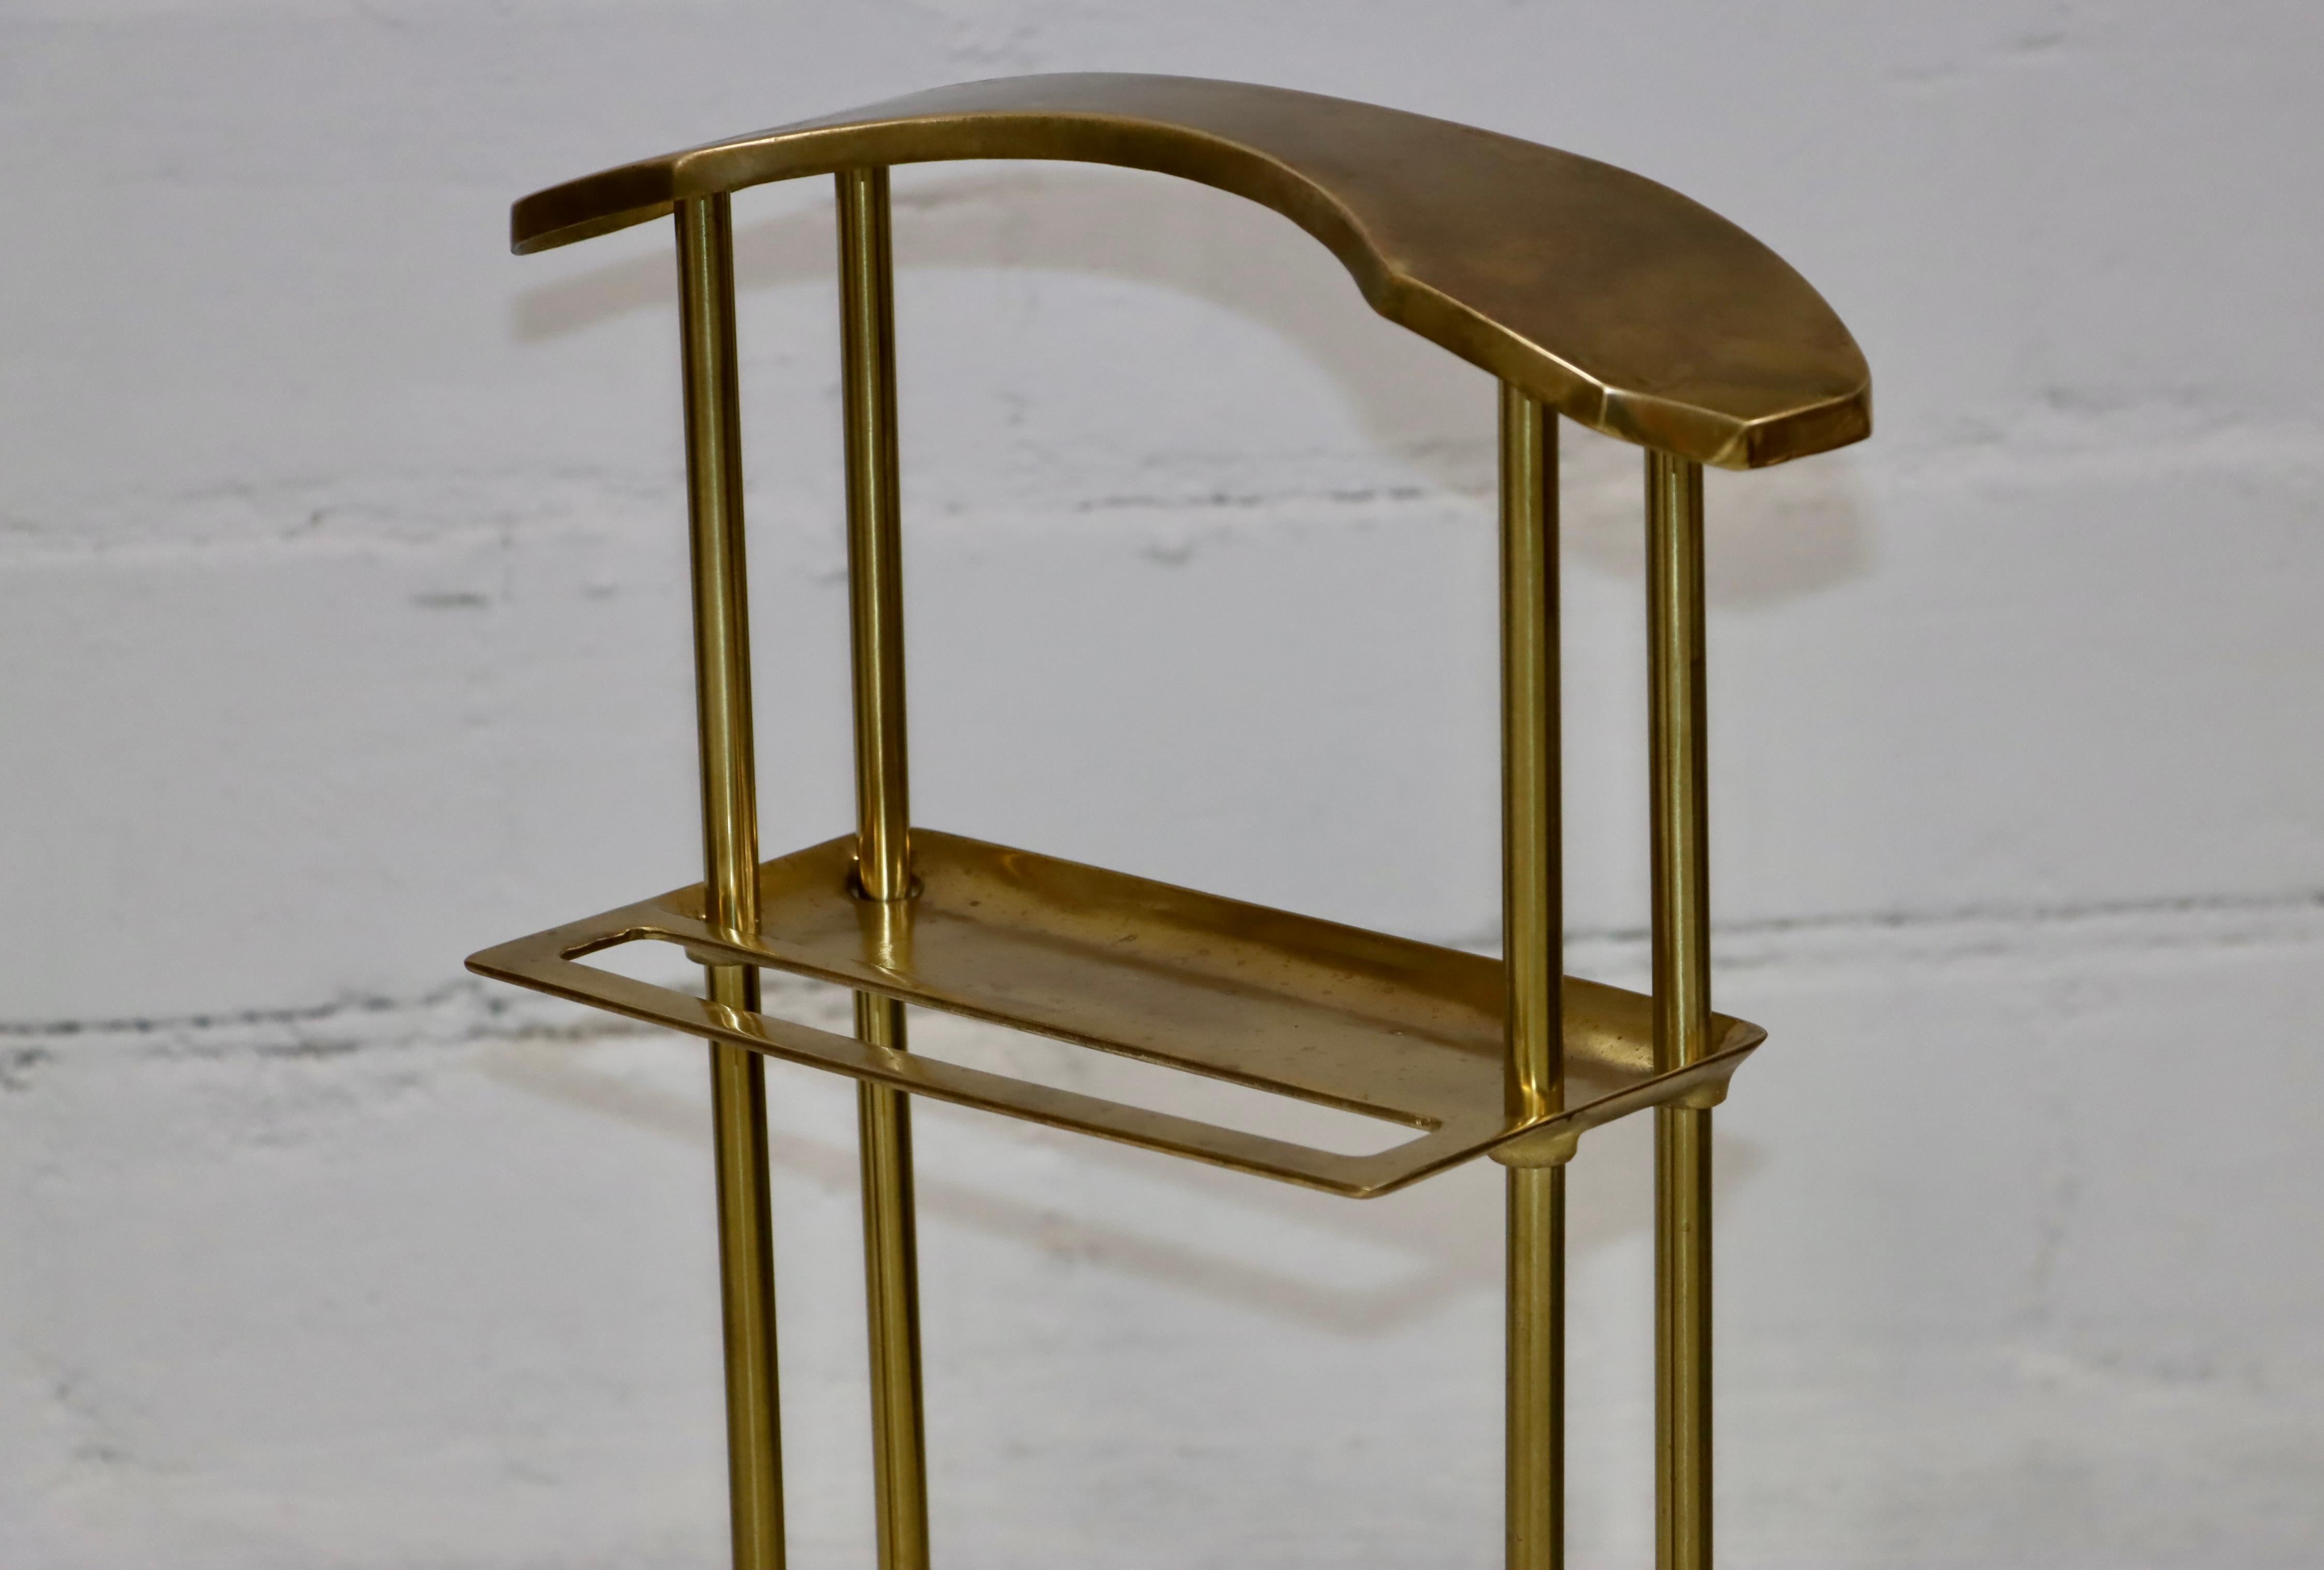 1980's Modernist Brass Valet Stand By Decorative Crafts Inc. For Sale 6